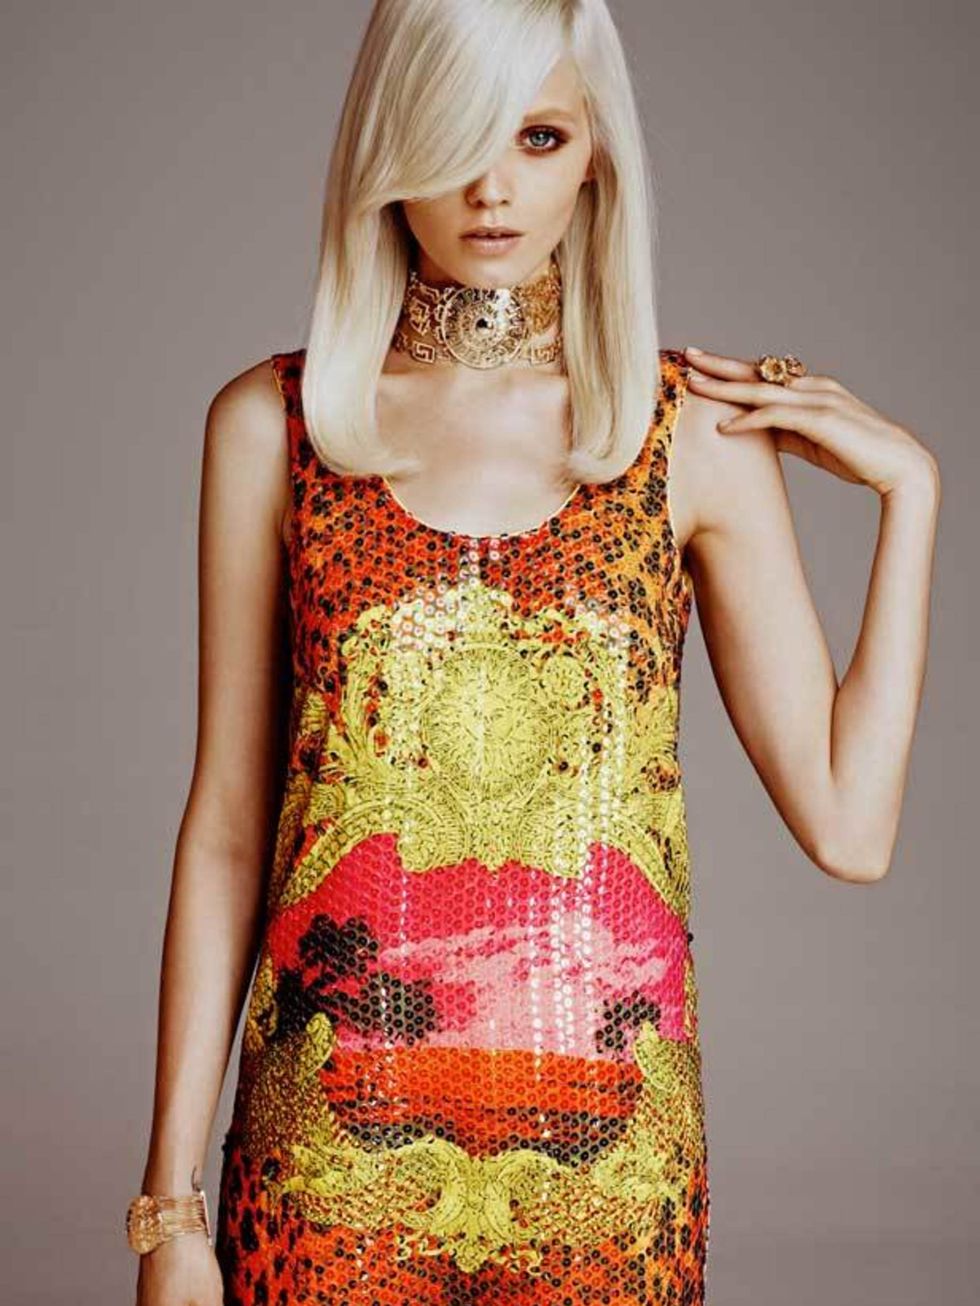 <p>Abbey Lee Kershaw models in the <a href="http://www.elleuk.com/catwalk/collections/versace/">Versace</a> for <a href="http://www.elleuk.com/content/search?SearchText=h%26m&amp;SearchButton=Search">H&amp;M</a> campaign</p>